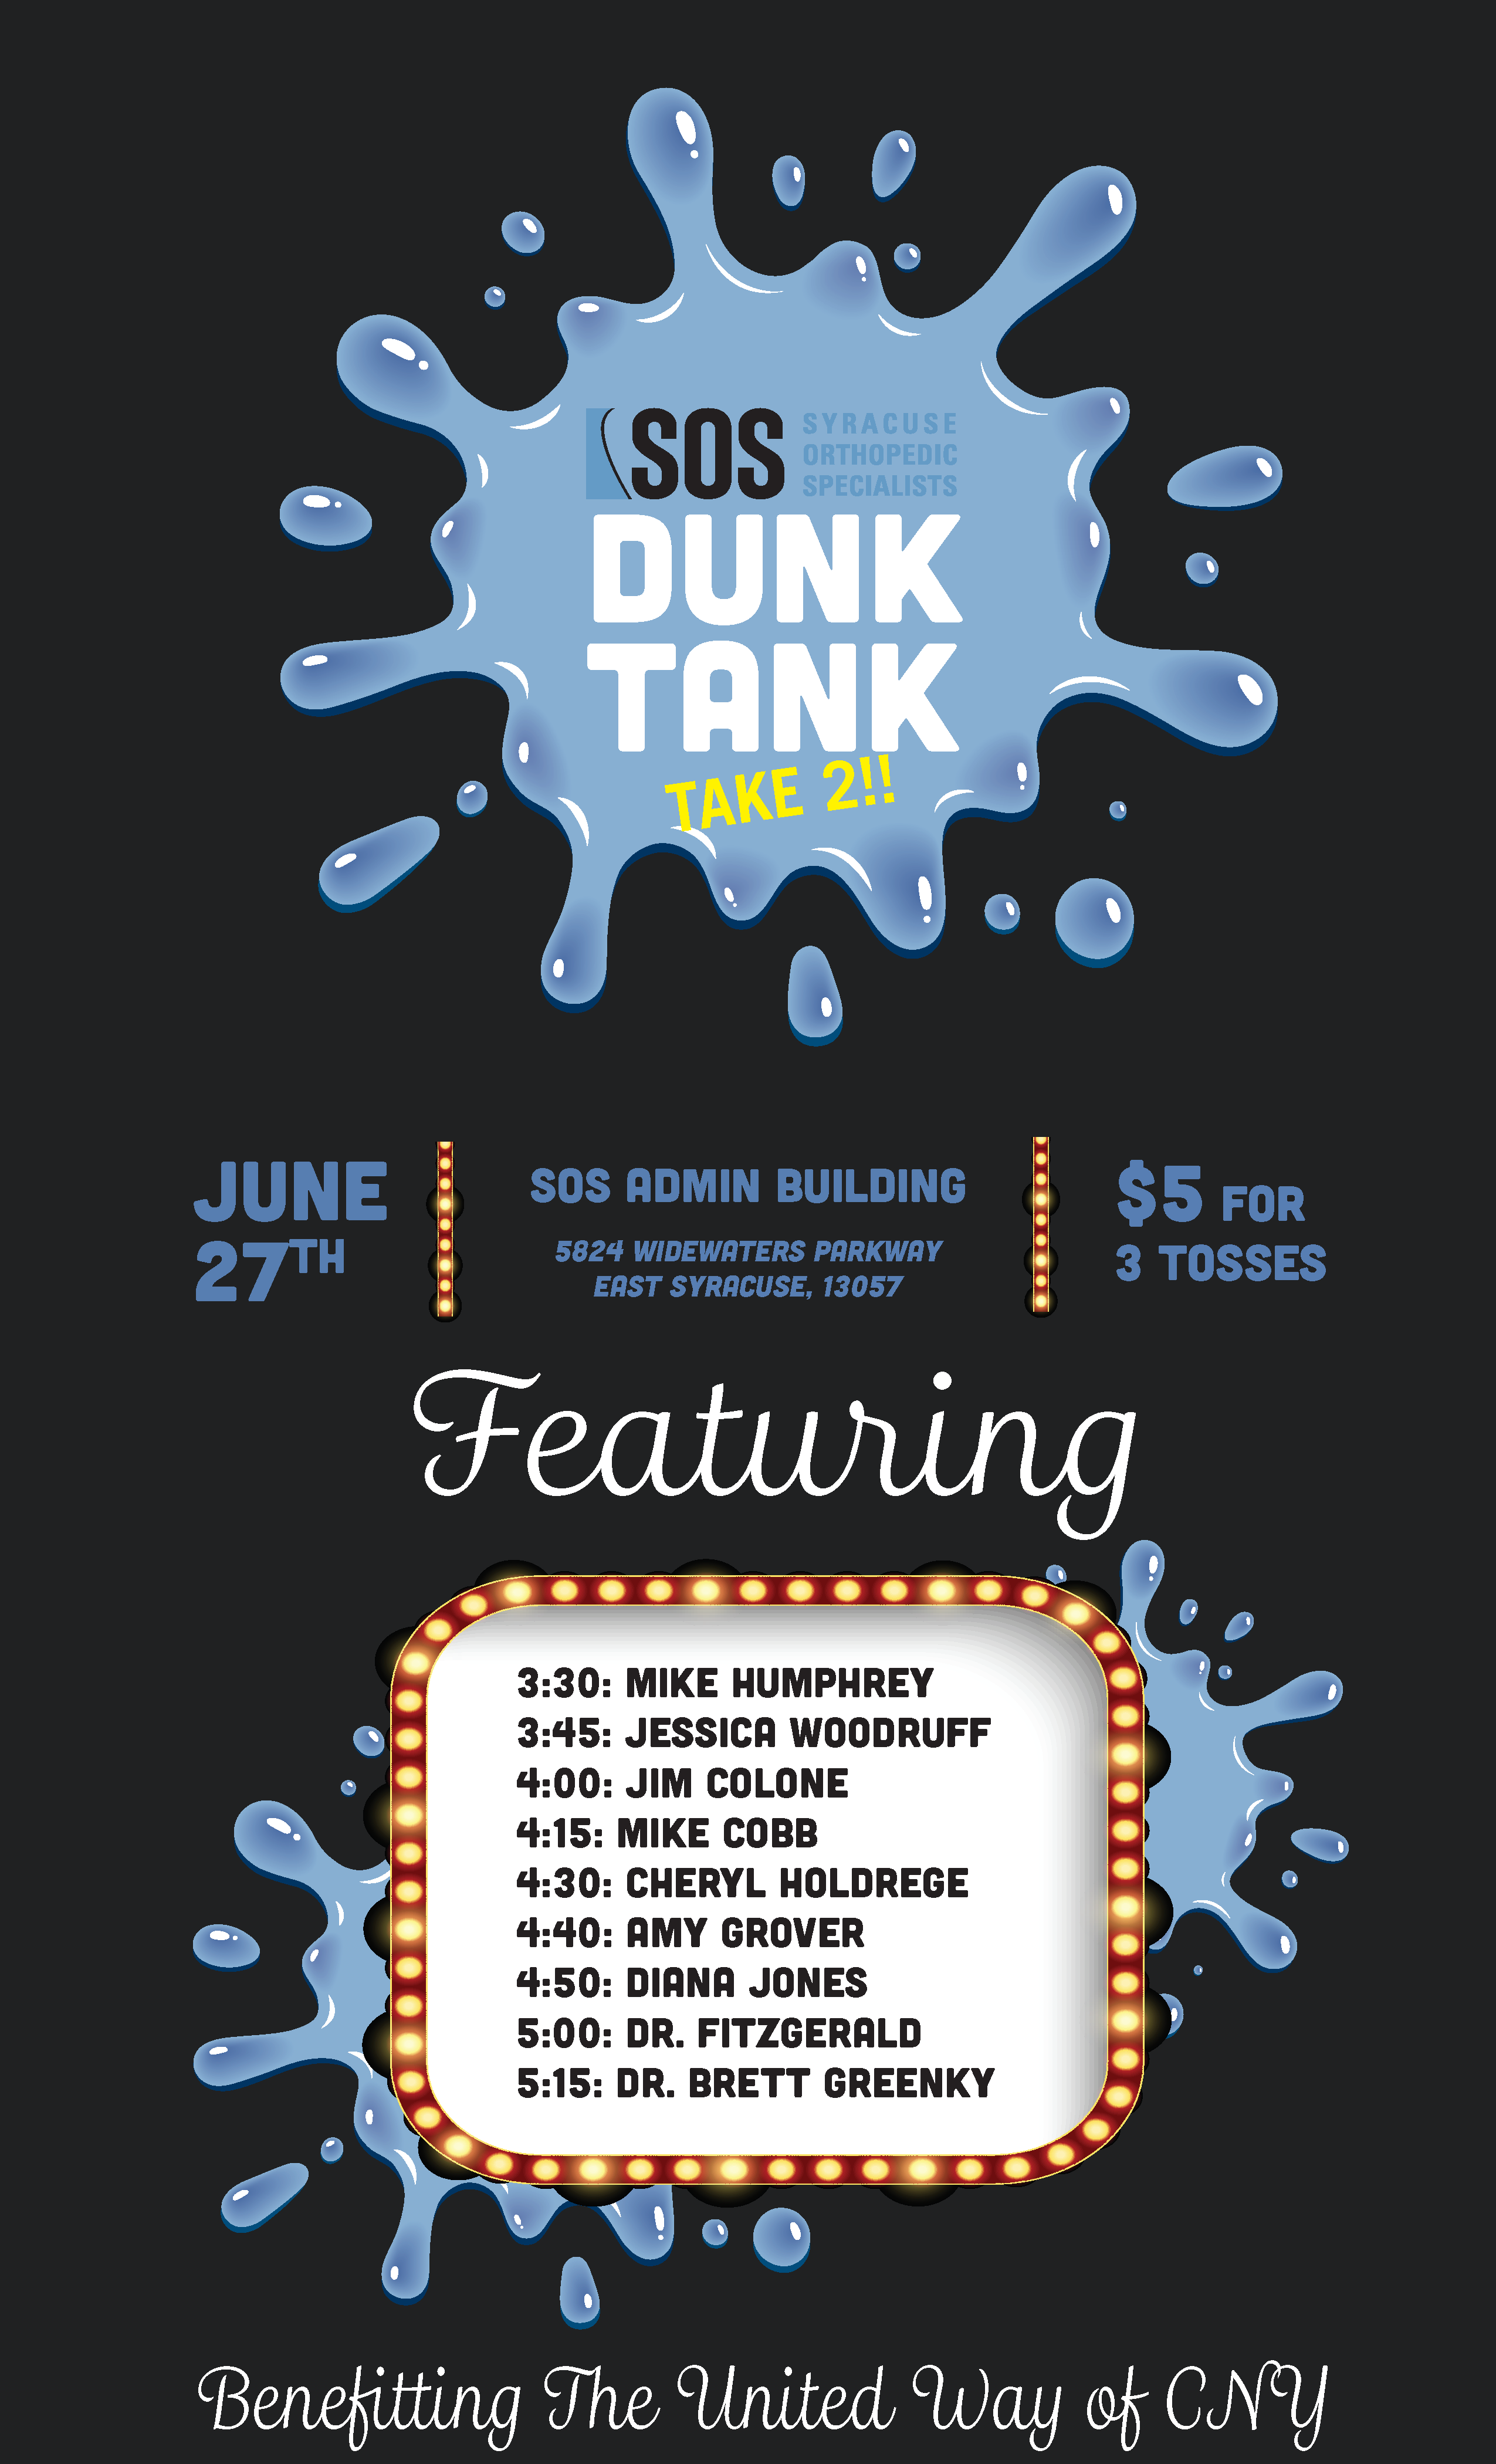 SOS Hosts Dunk Tank Fundraiser to Benefit the United Way of CNY